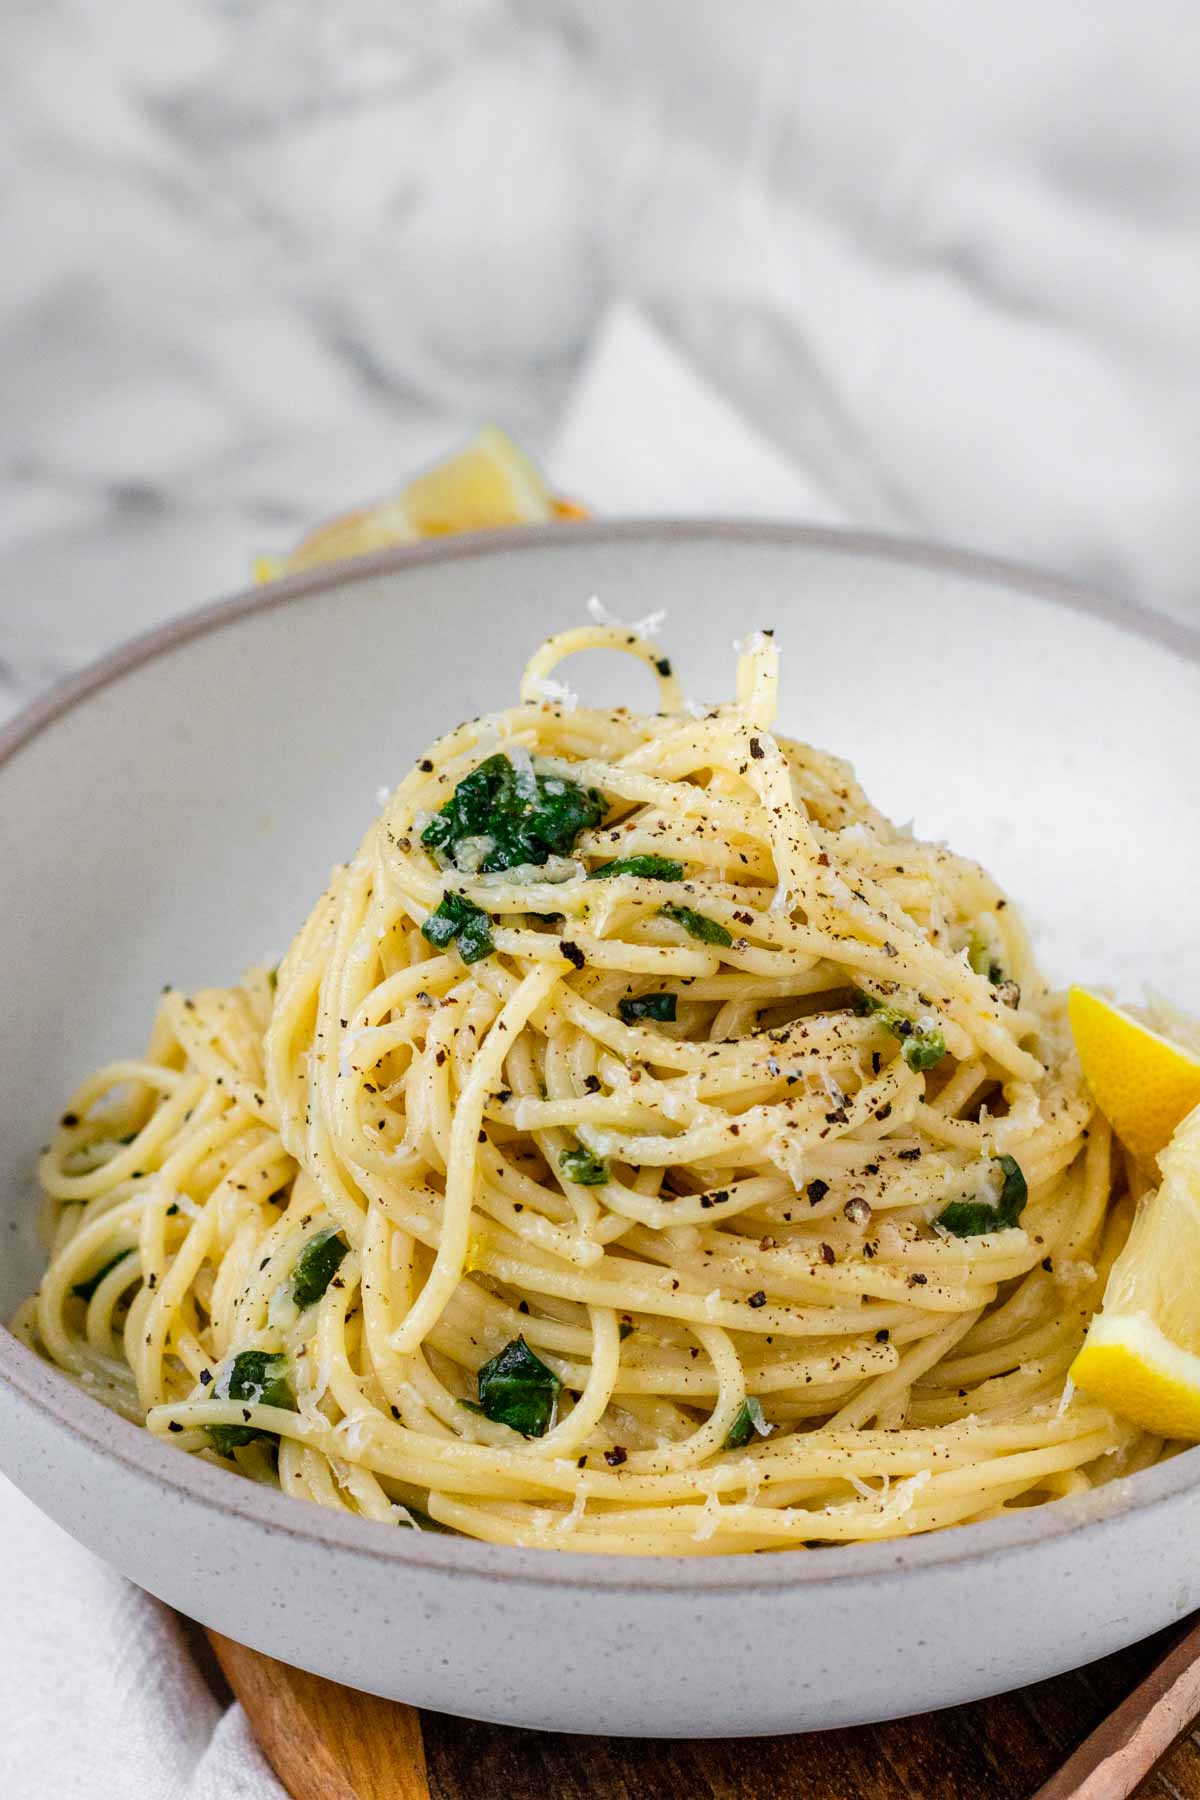 Pasta swirled in a bowl with spinach, cheese, and lemon slices on the side.